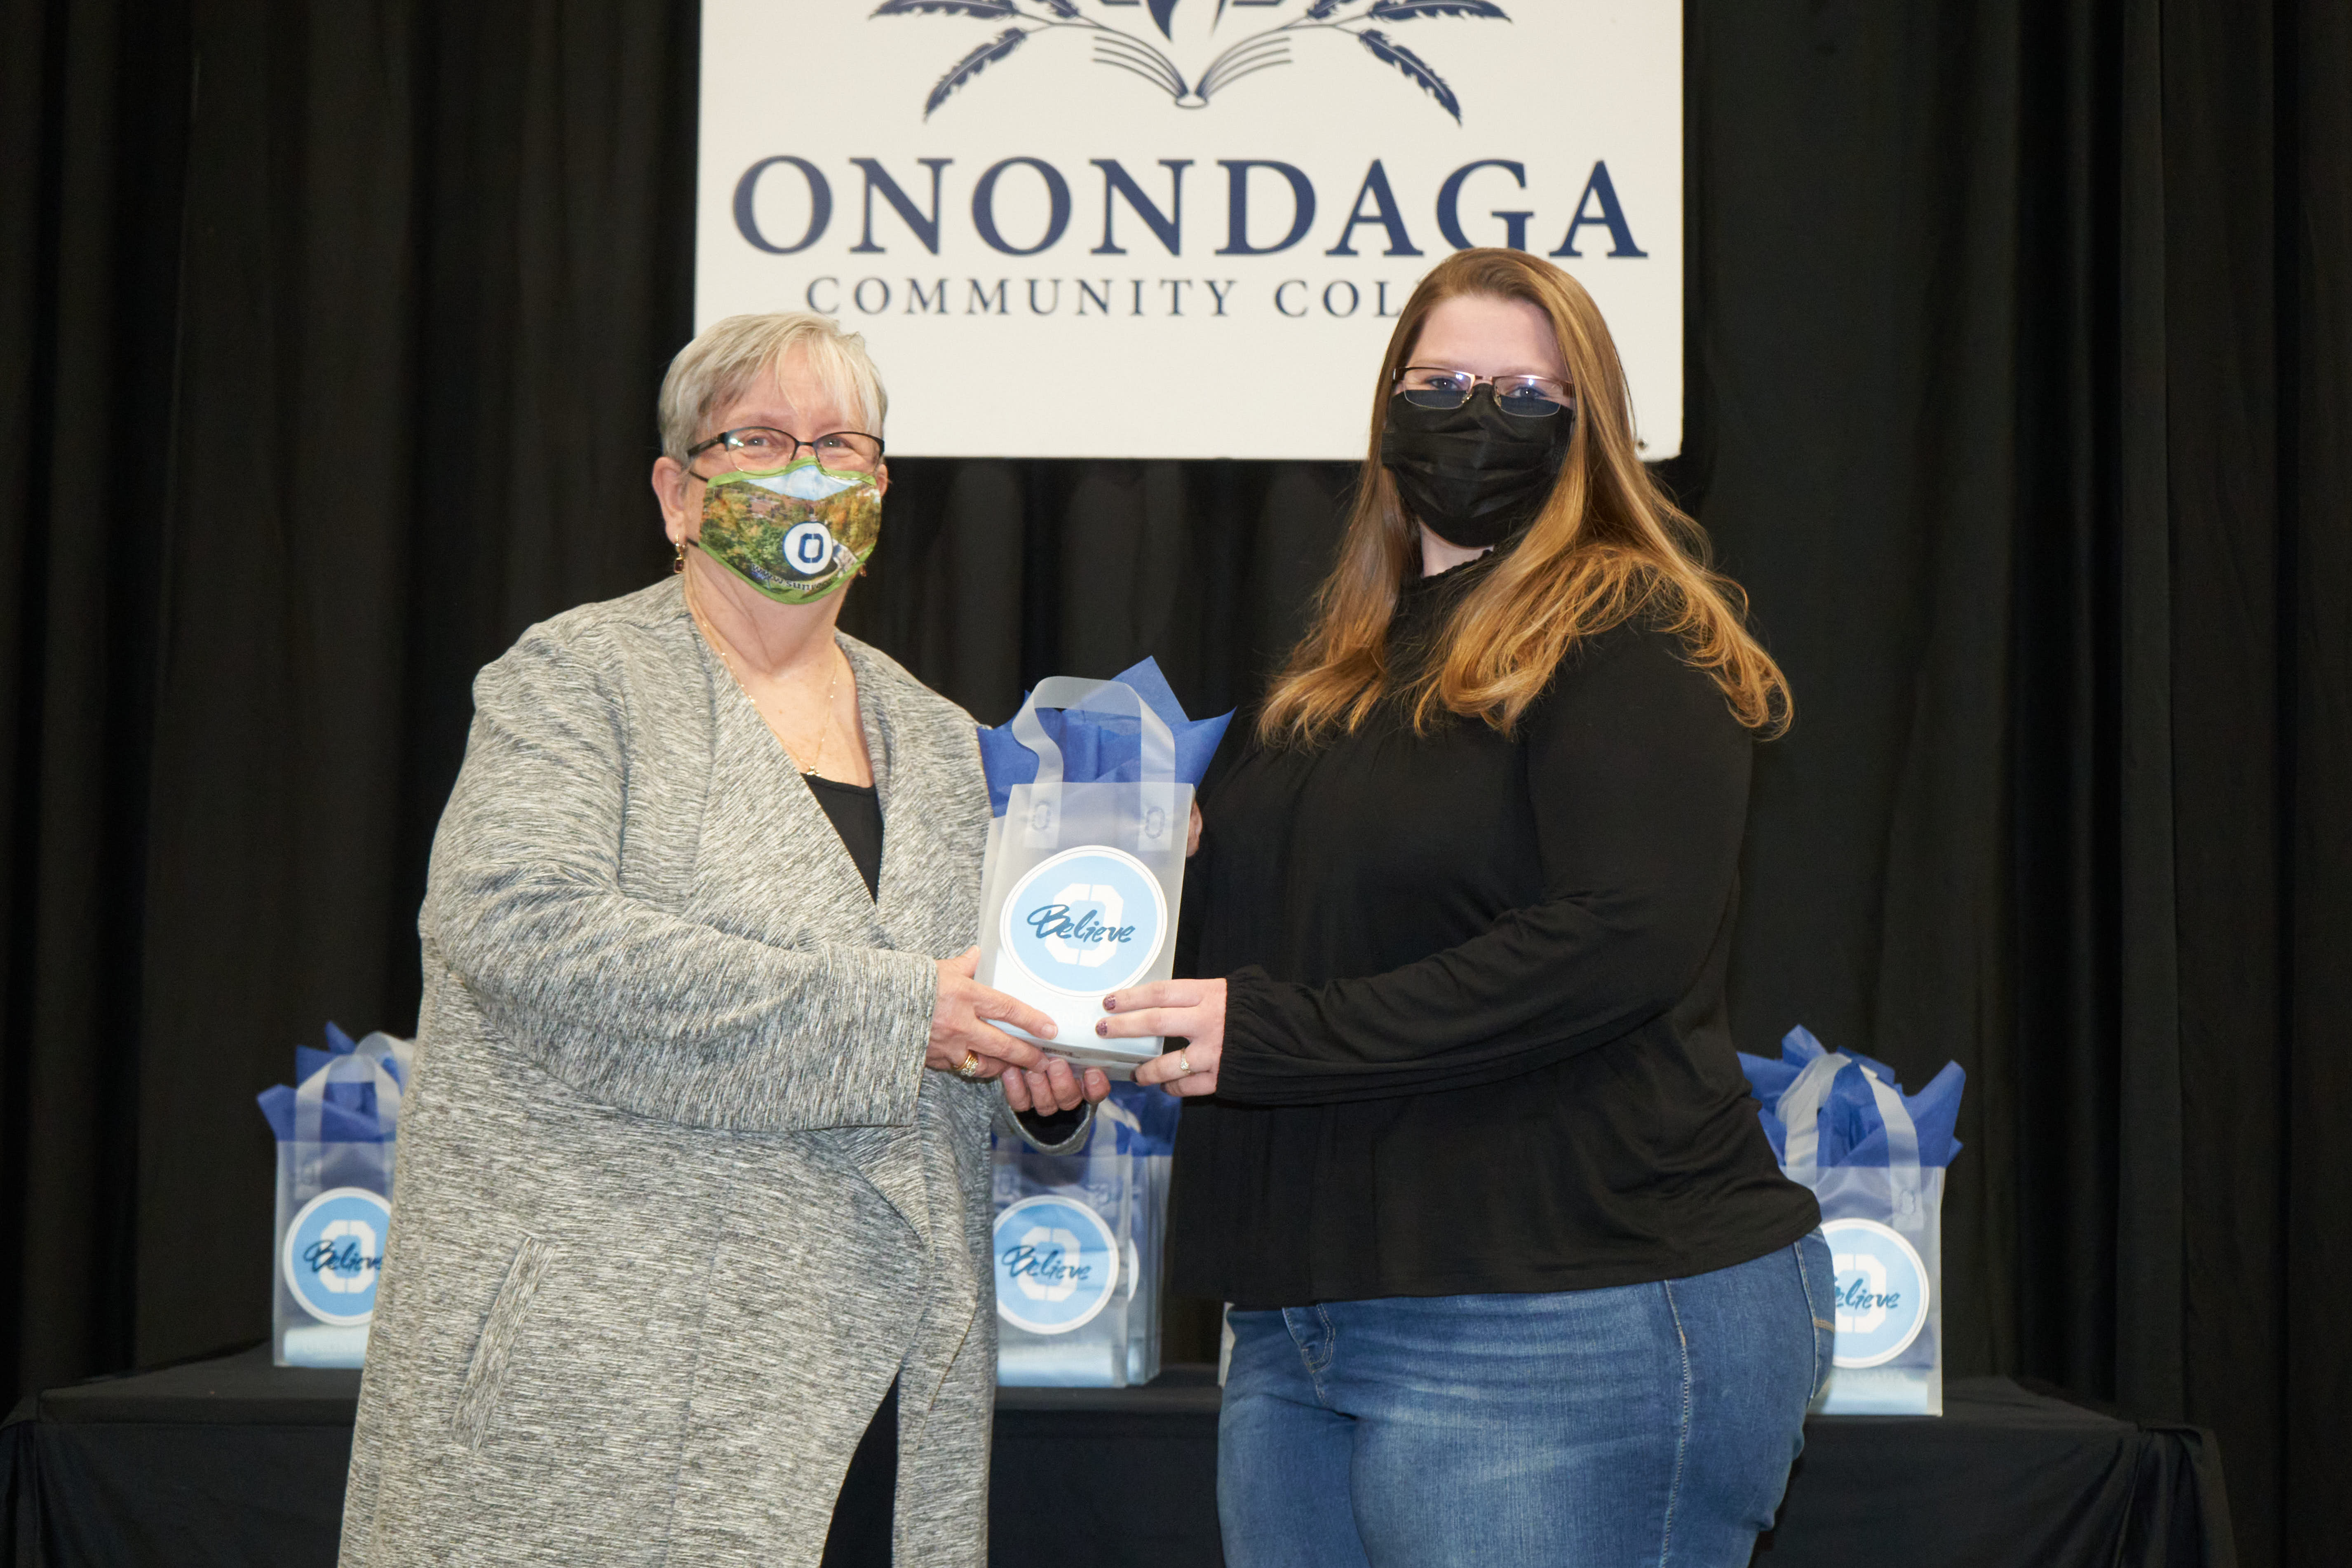 Early Childcare Certificate Curriculum Honoree Kathryn Conner (right) is pictured with OCC President Dr. Casey Crabill (left).